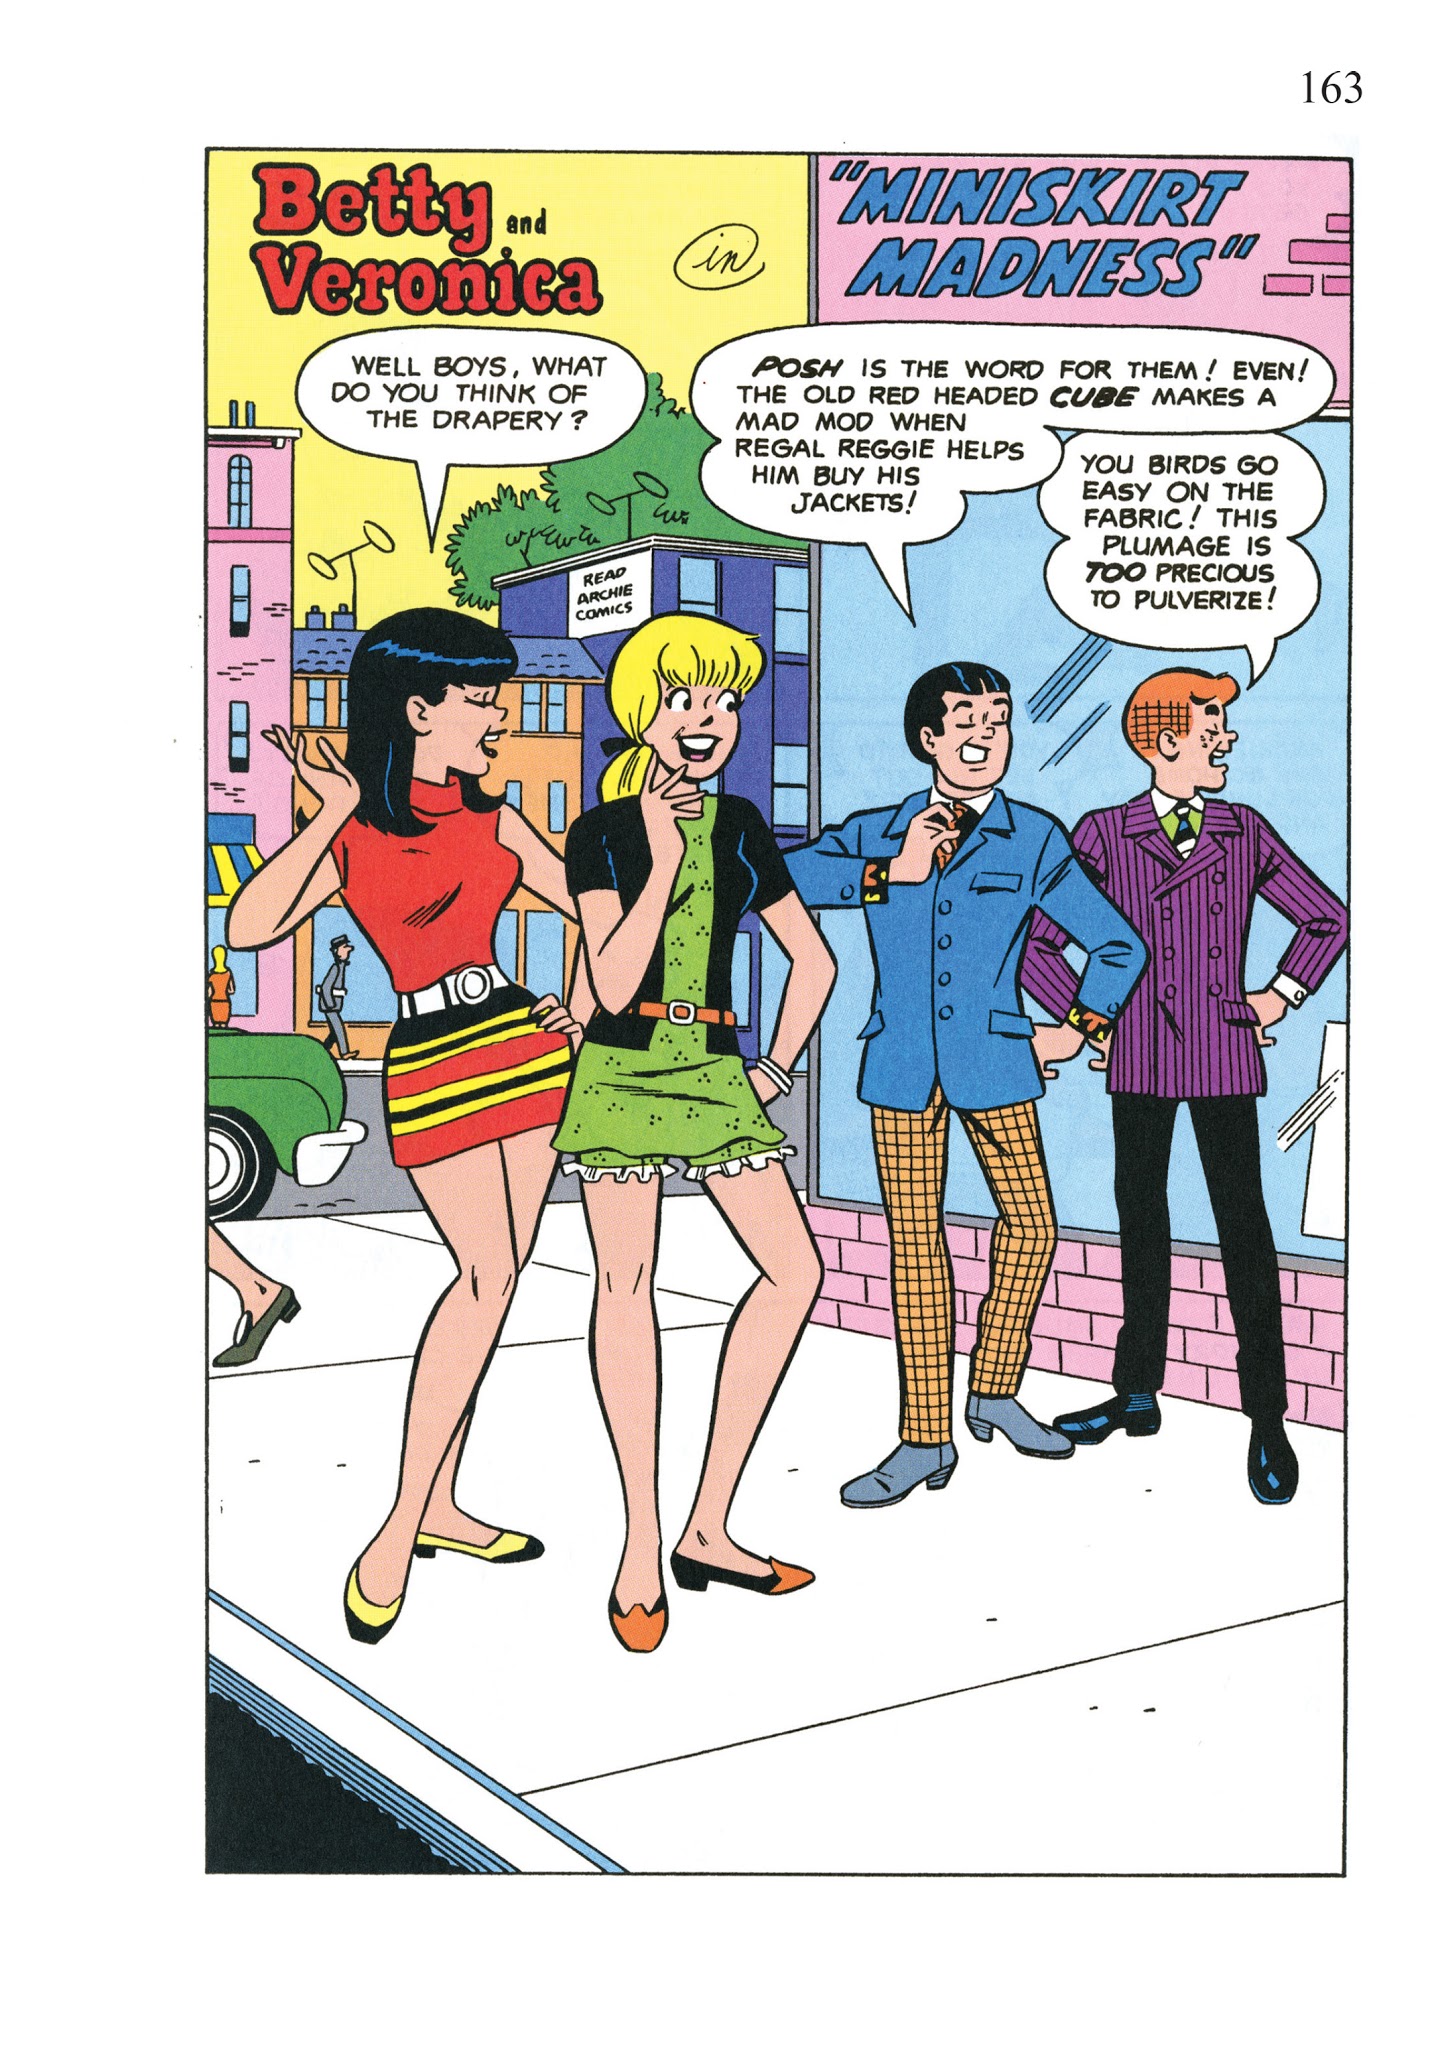 Read online The Best of Archie Comics: Betty & Veronica comic -  Issue # TPB - 164